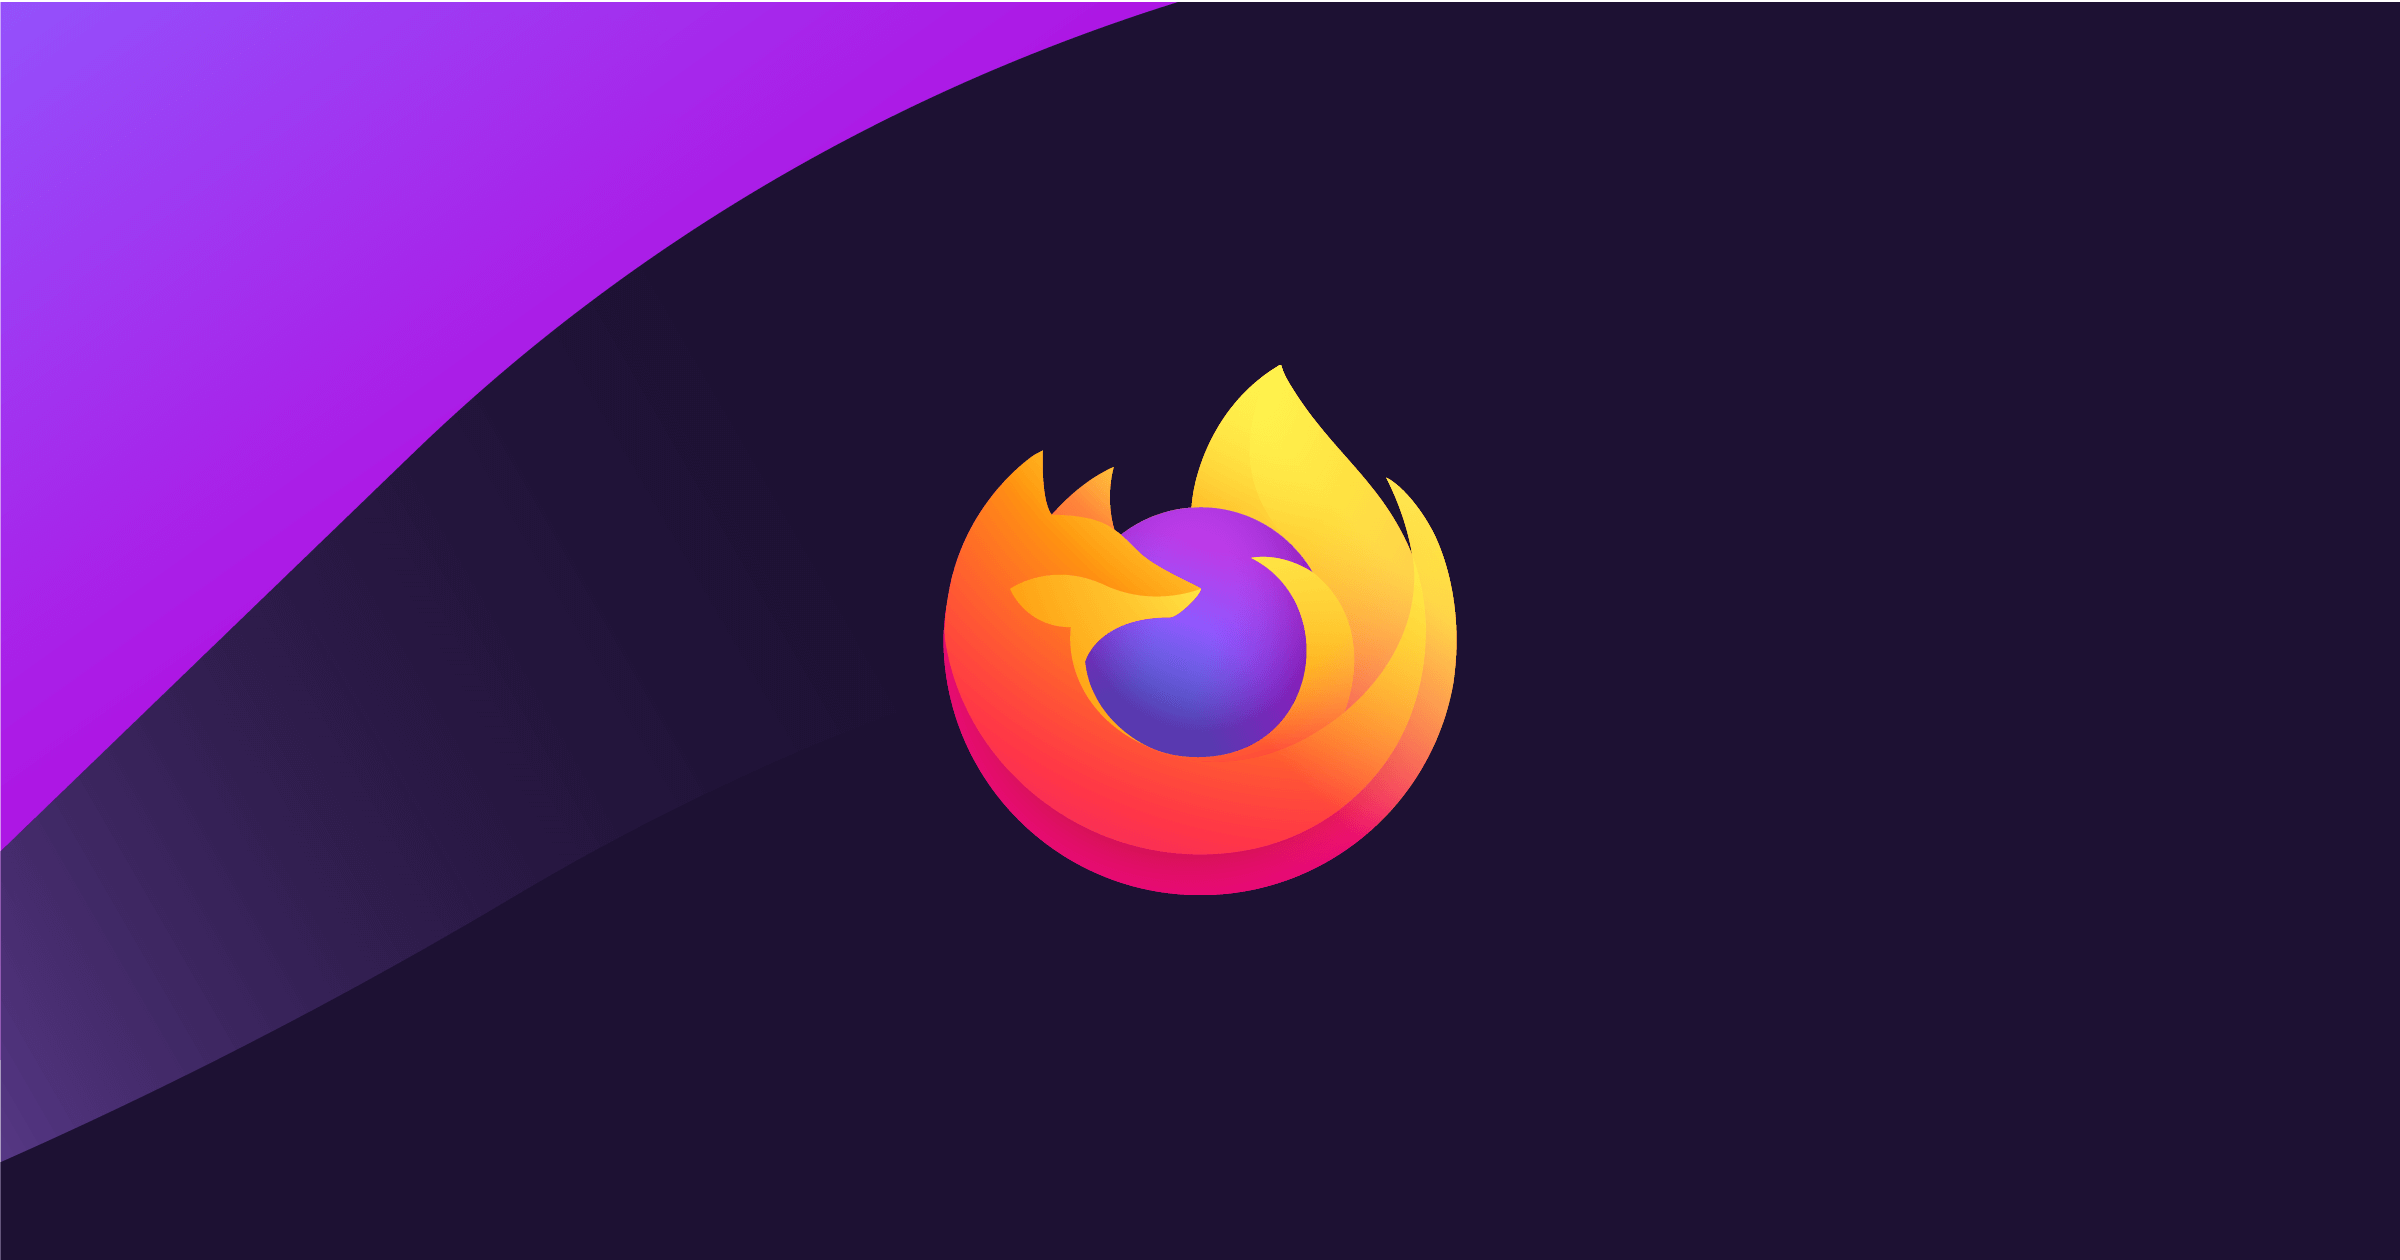 firefox browser download for windows